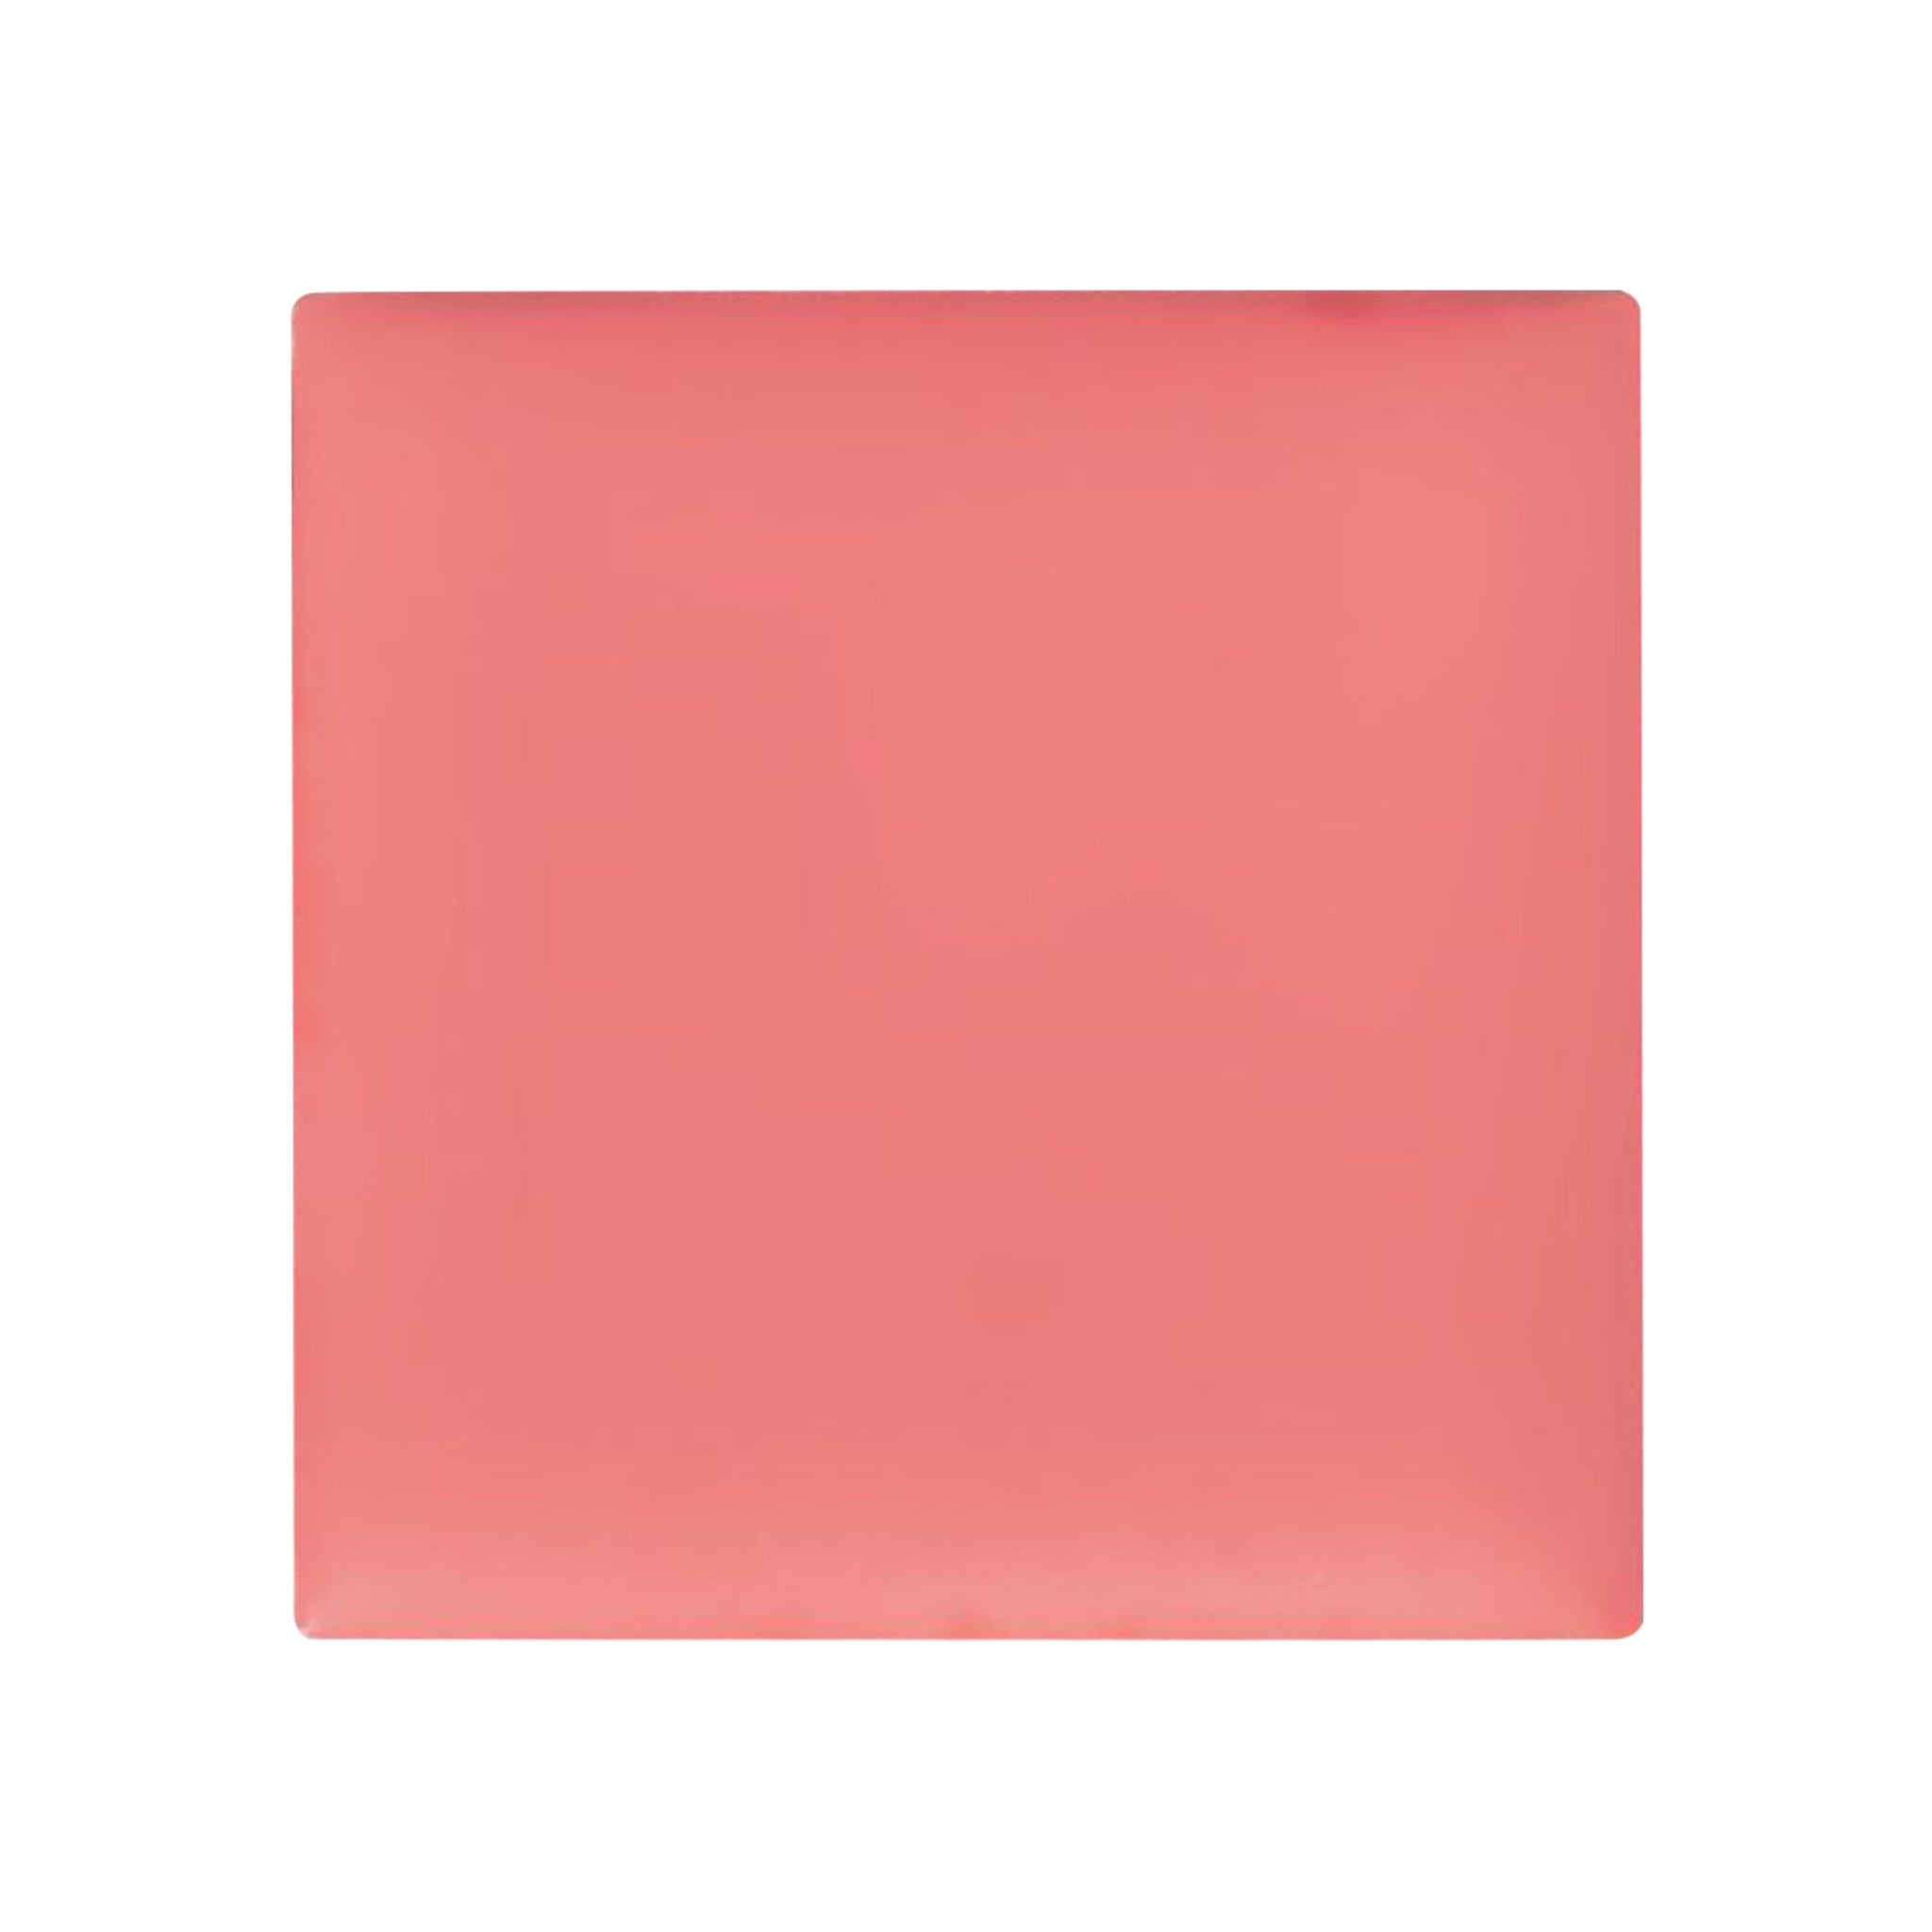 Kjaer Weis Cream Blush Refill Color/Shade variant: Blossoming main image. This product is in the color coral